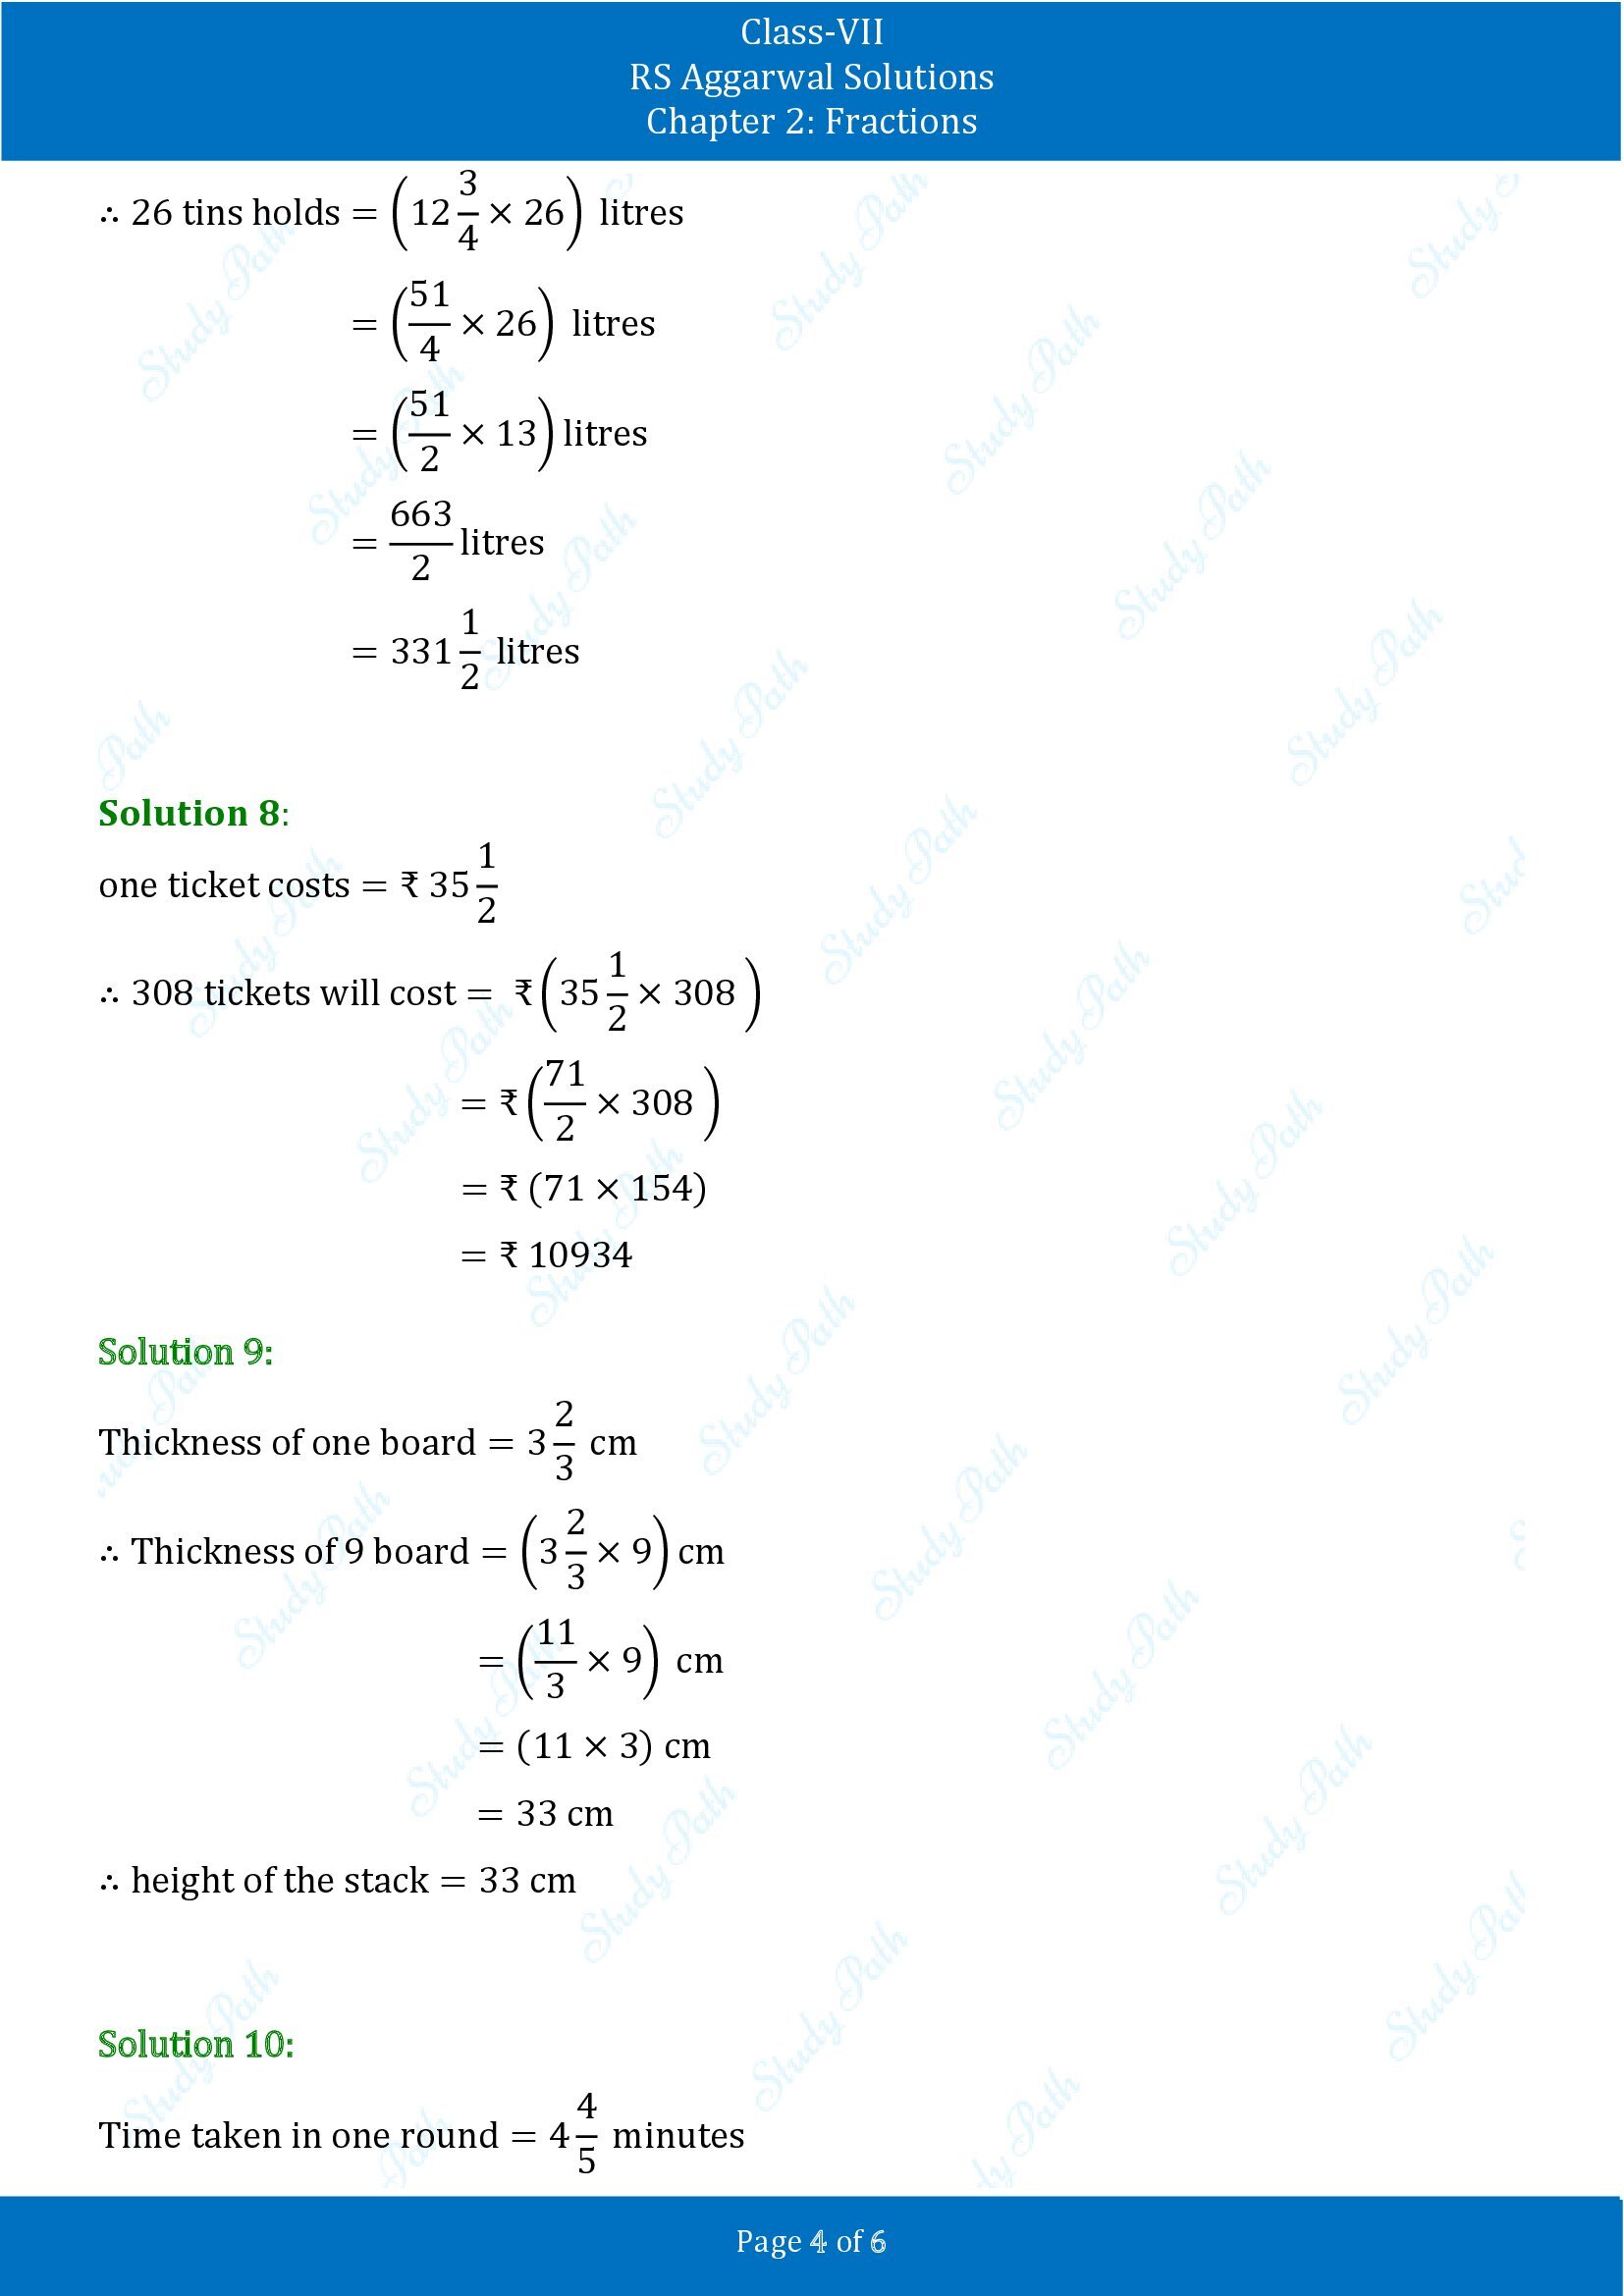 RS Aggarwal Solutions Class 7 Chapter 2 Fractions Exercise 2B 00004